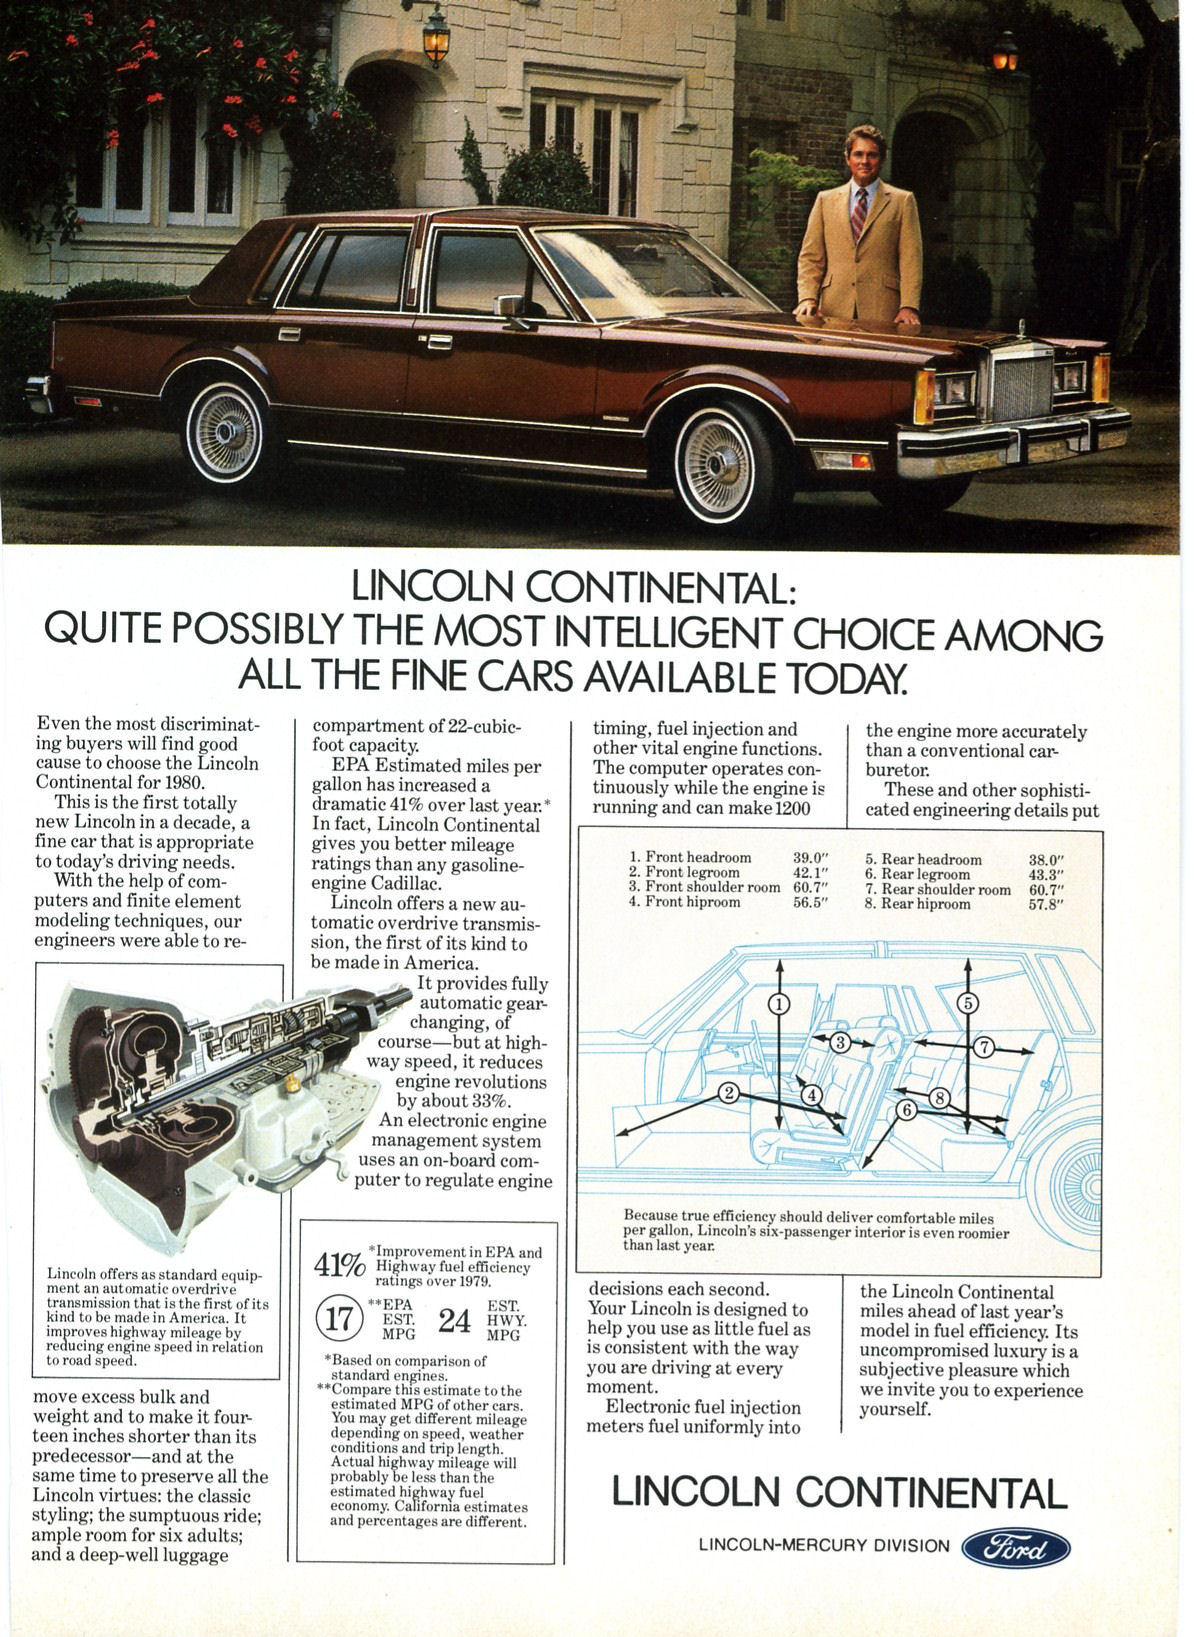 1980 Lincoln Auto Advertising